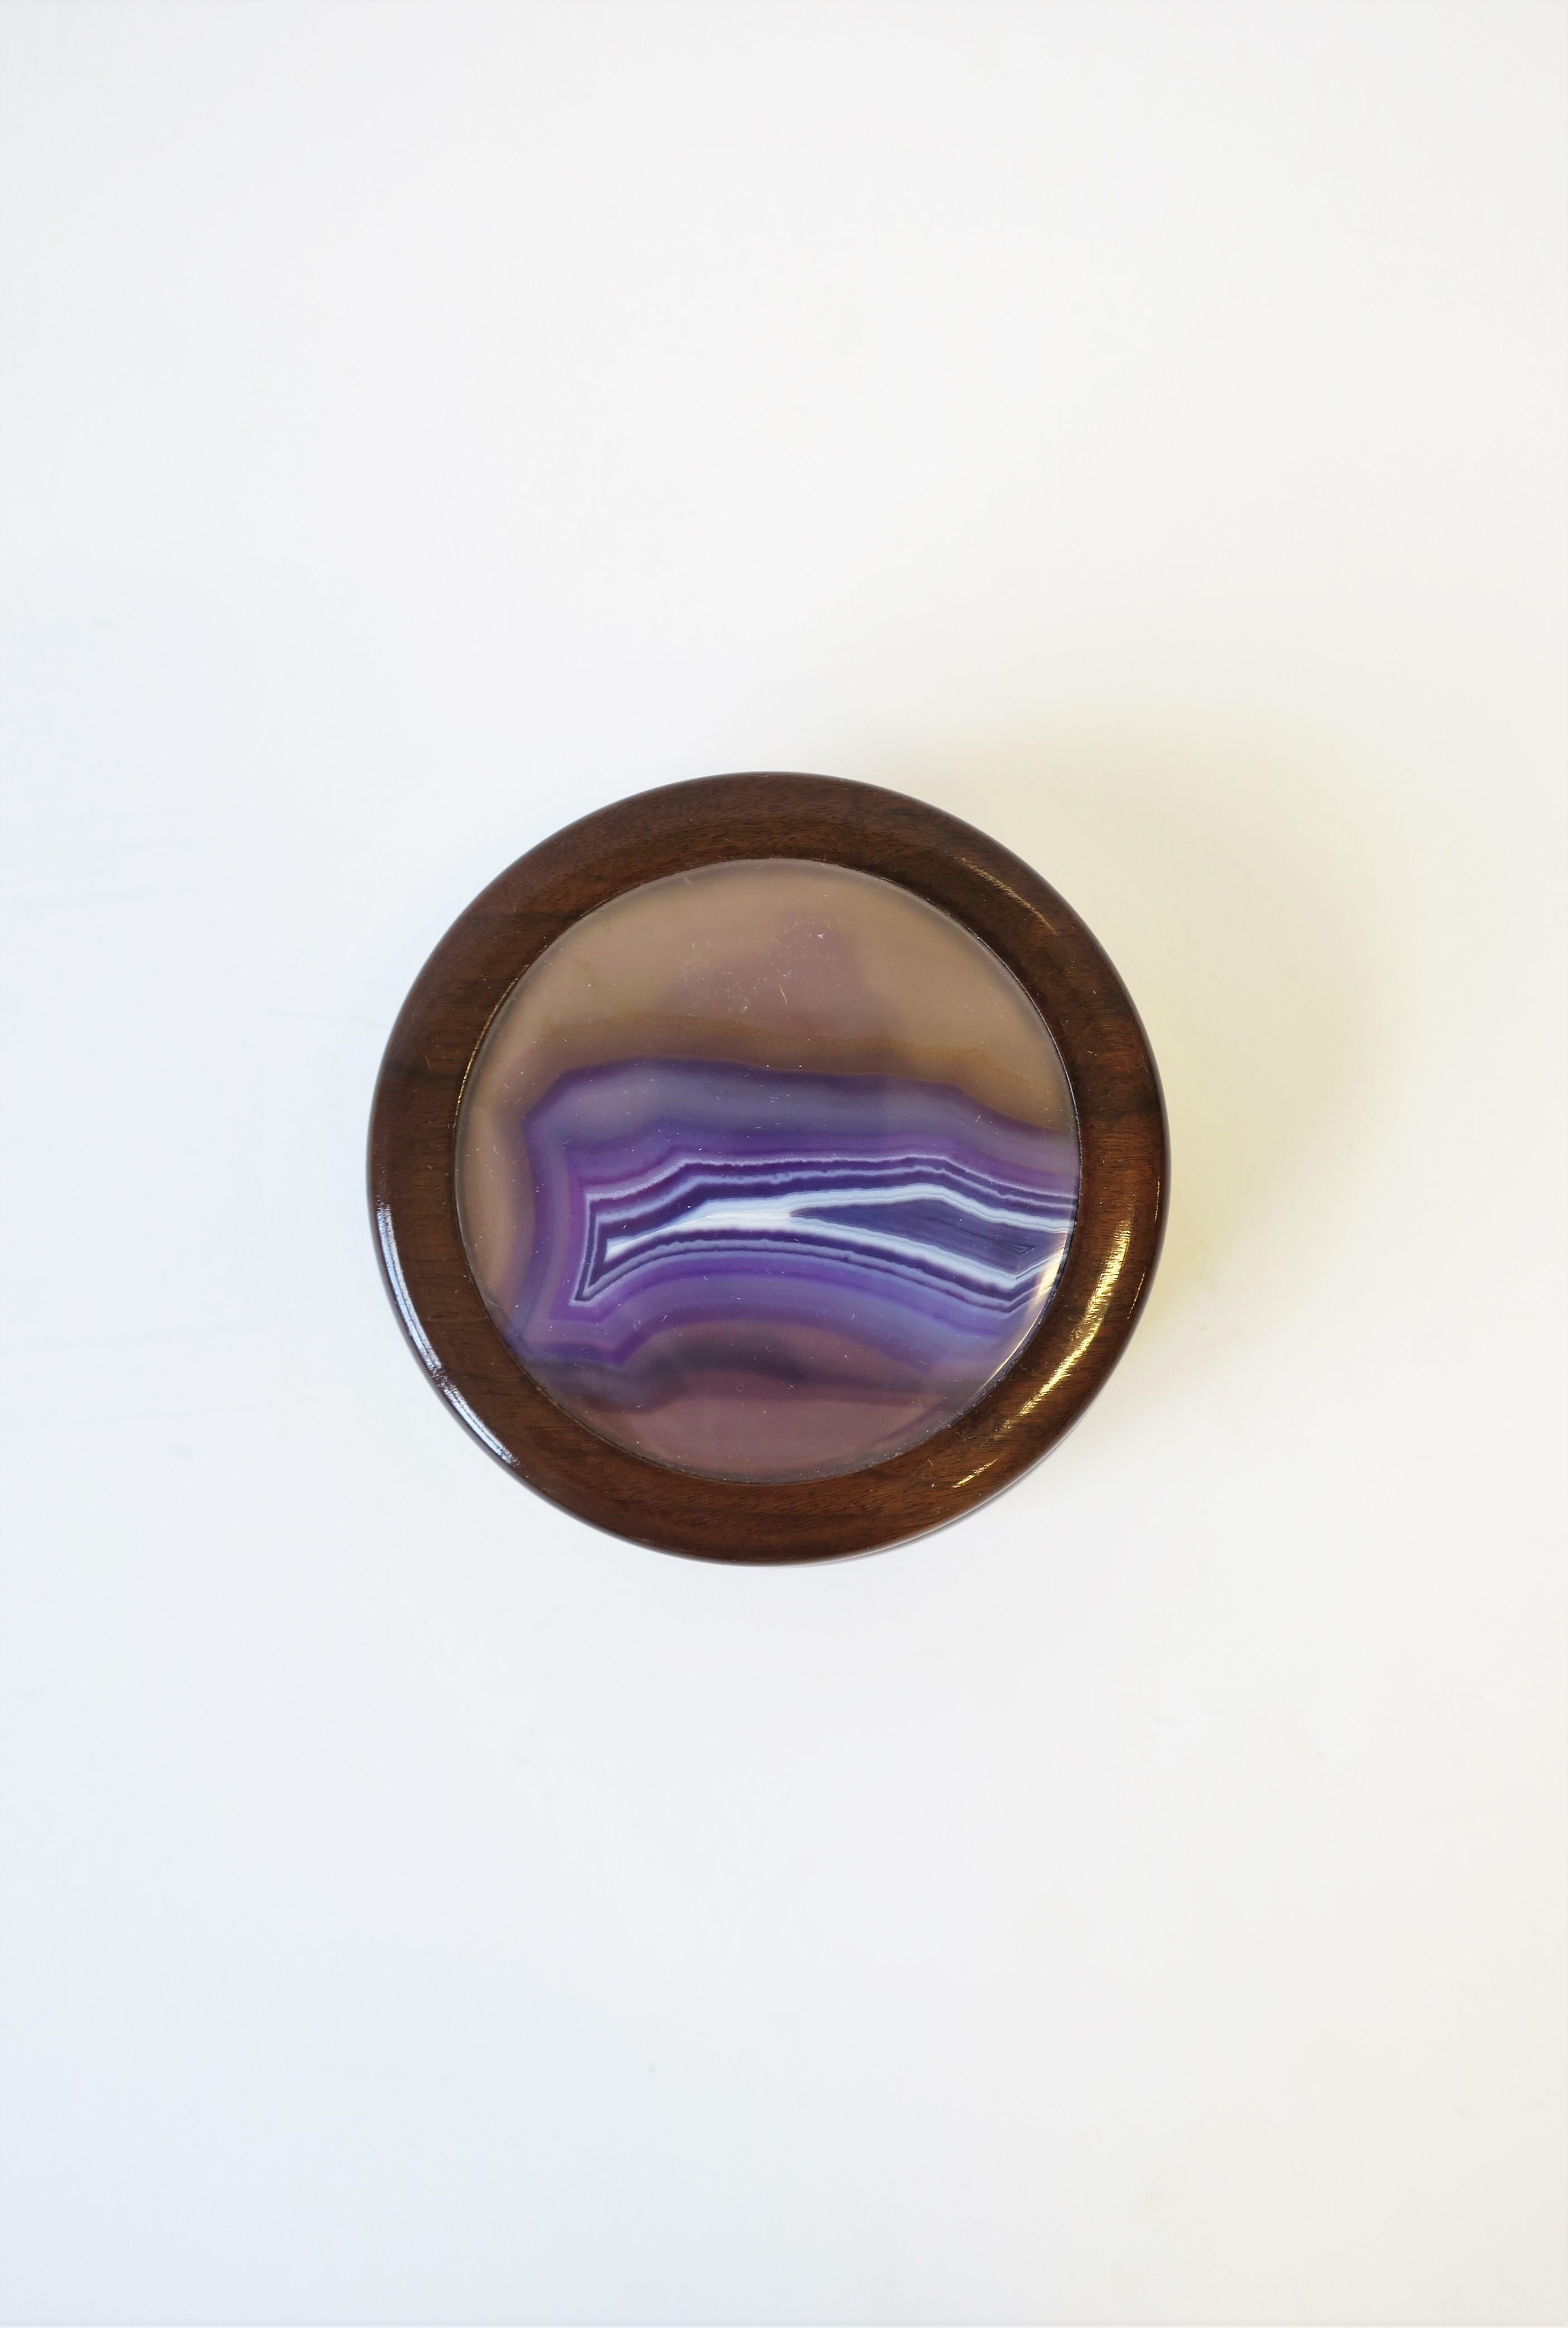 A wood and purple agate geode round jewelry or trinket box, circa 1990s, late 20th century, Brazil. A great piece for a desk, vanity, nightstand table area to hold small items or jewelry. Dimensions: 4.38